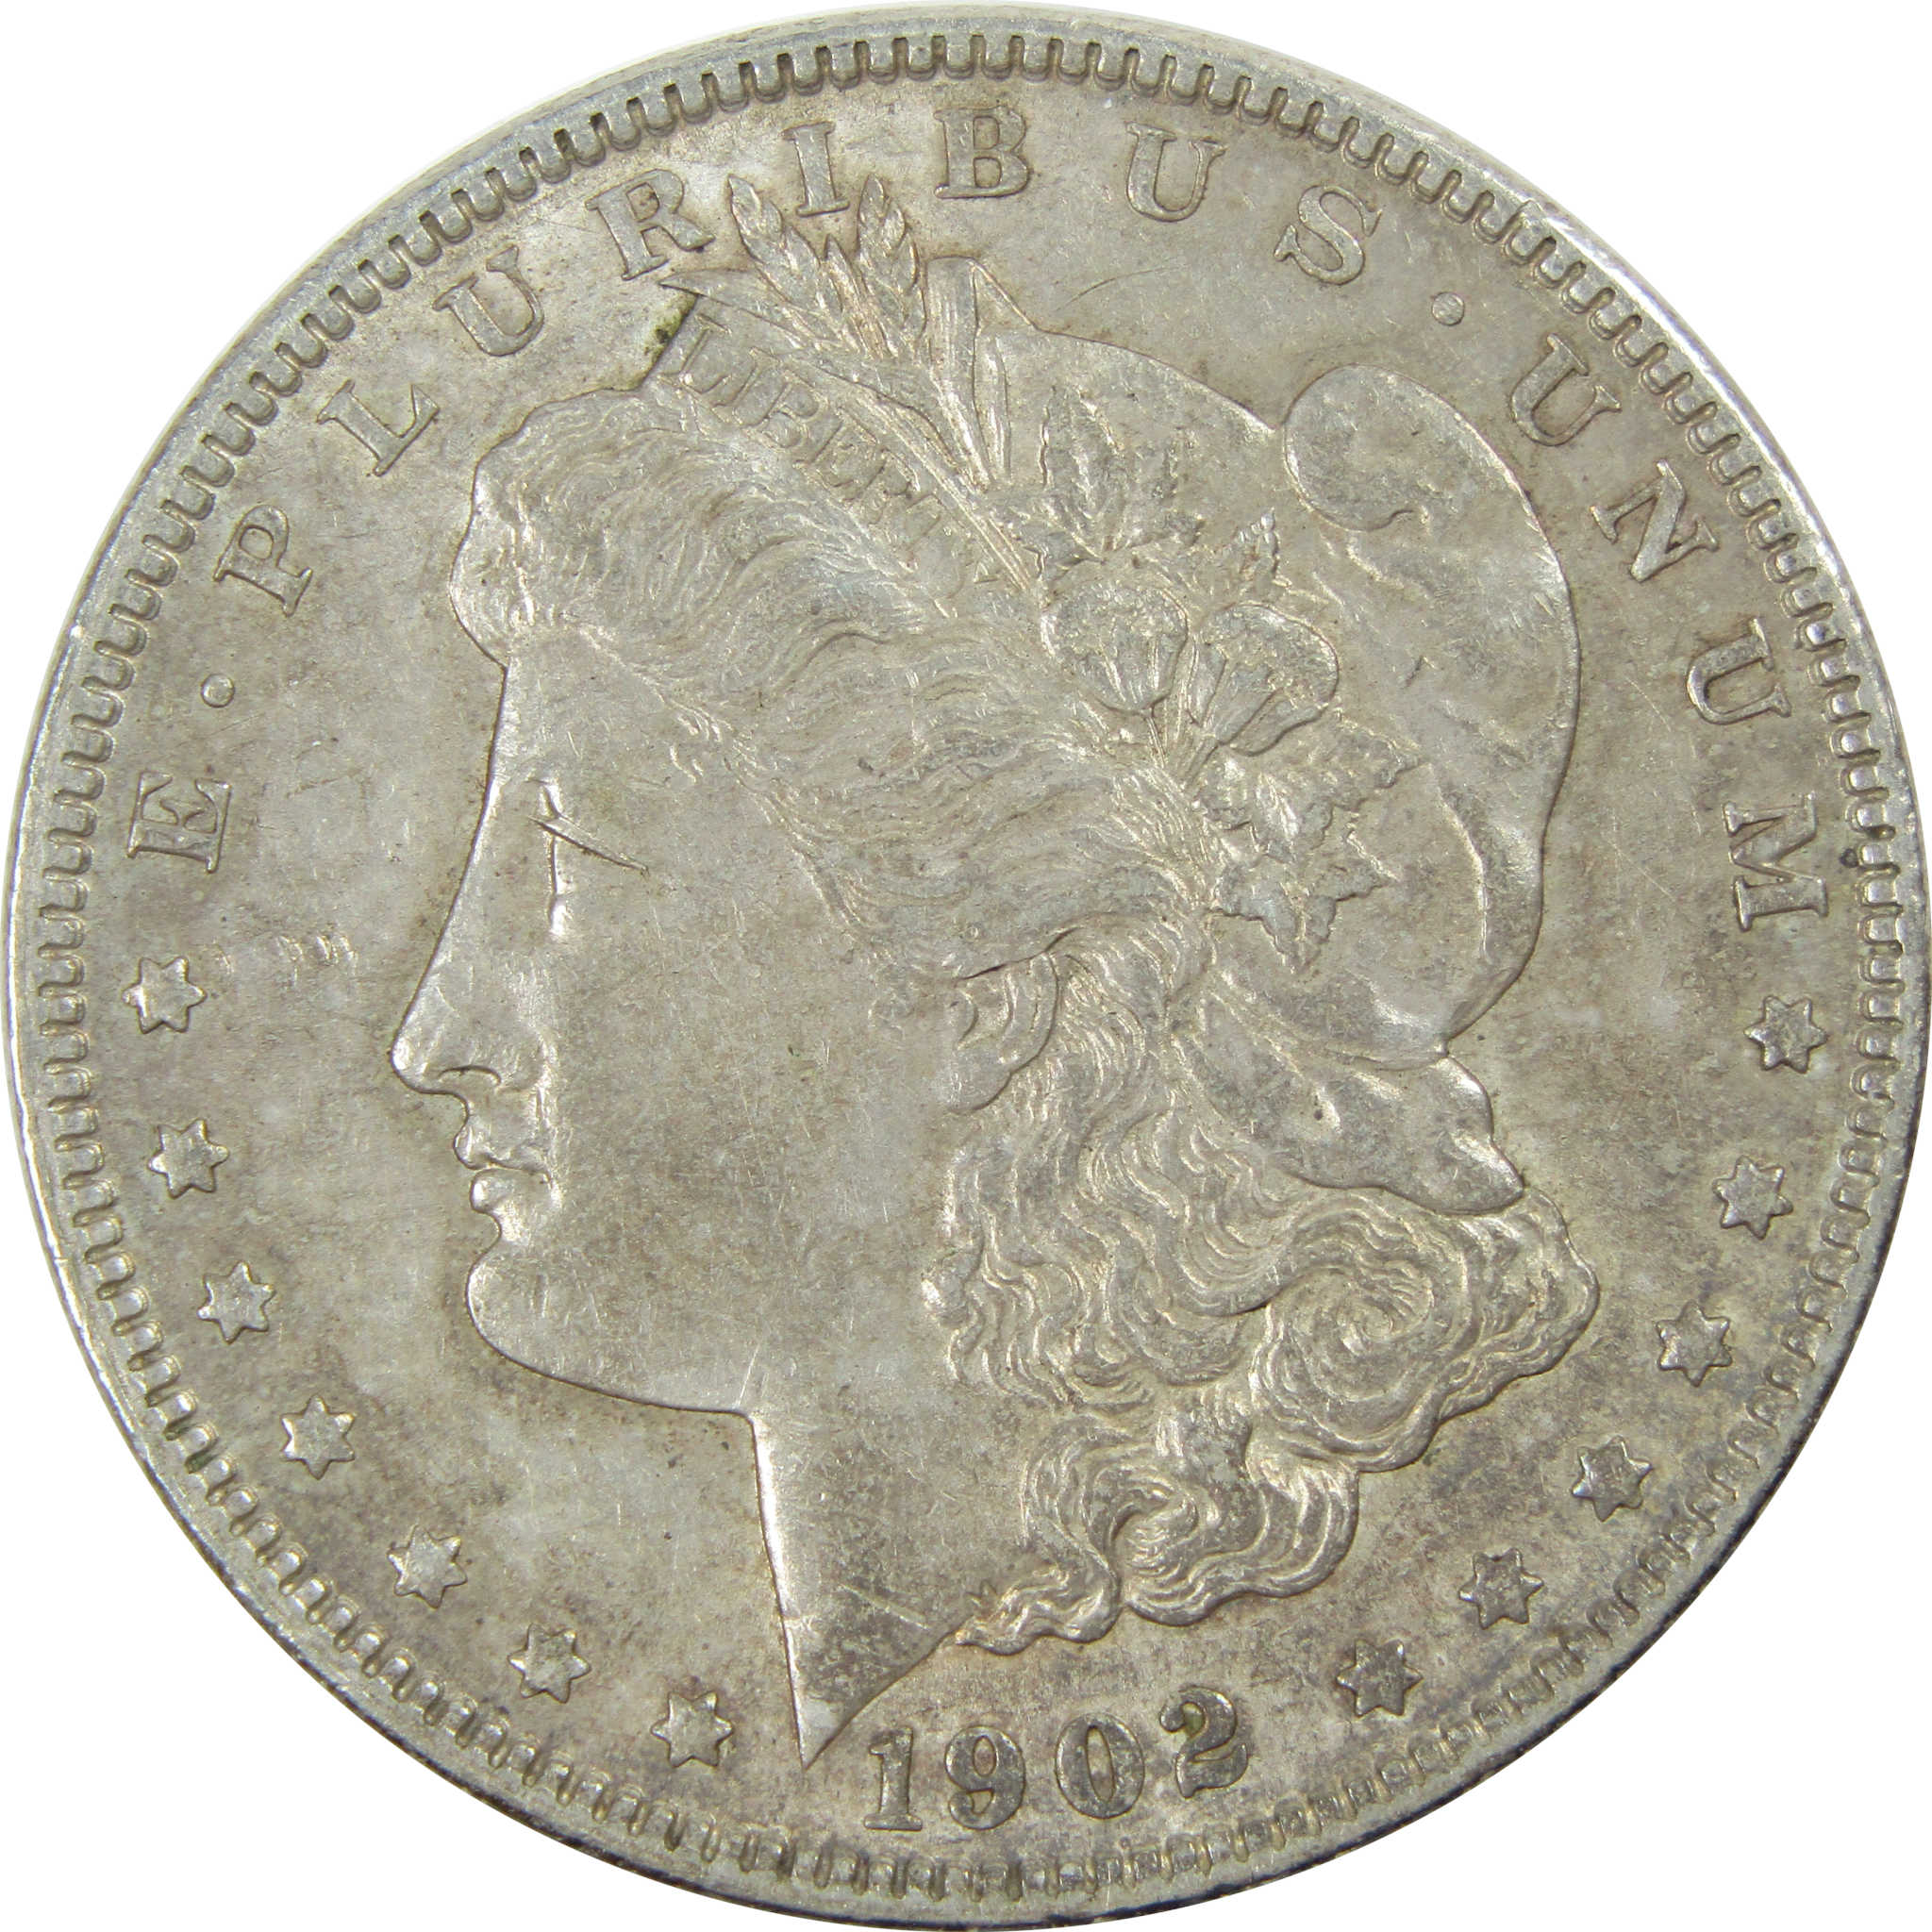 1902 Morgan Dollar AU About Uncirculated Silver $1 Coin SKU:I13677 - Morgan coin - Morgan silver dollar - Morgan silver dollar for sale - Profile Coins &amp; Collectibles